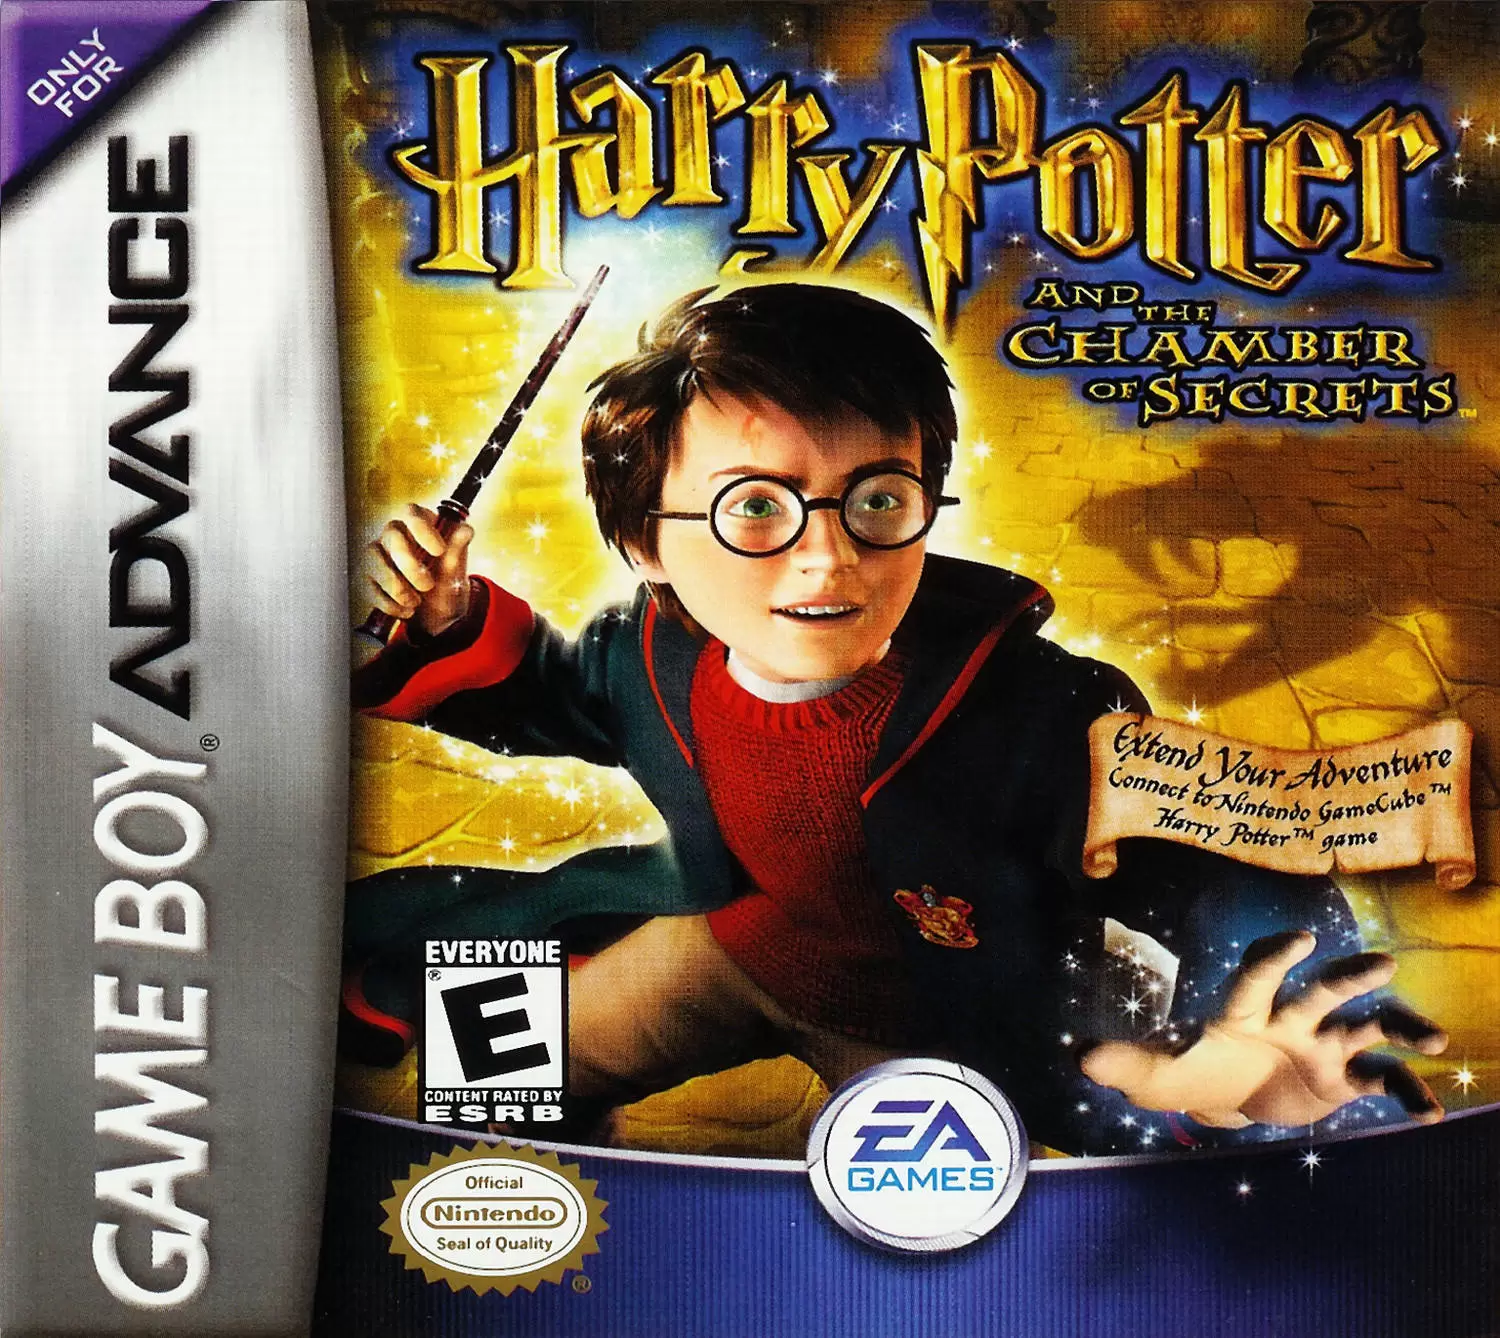 Game Boy Advance Games - Harry Potter and the Chamber of Secrets